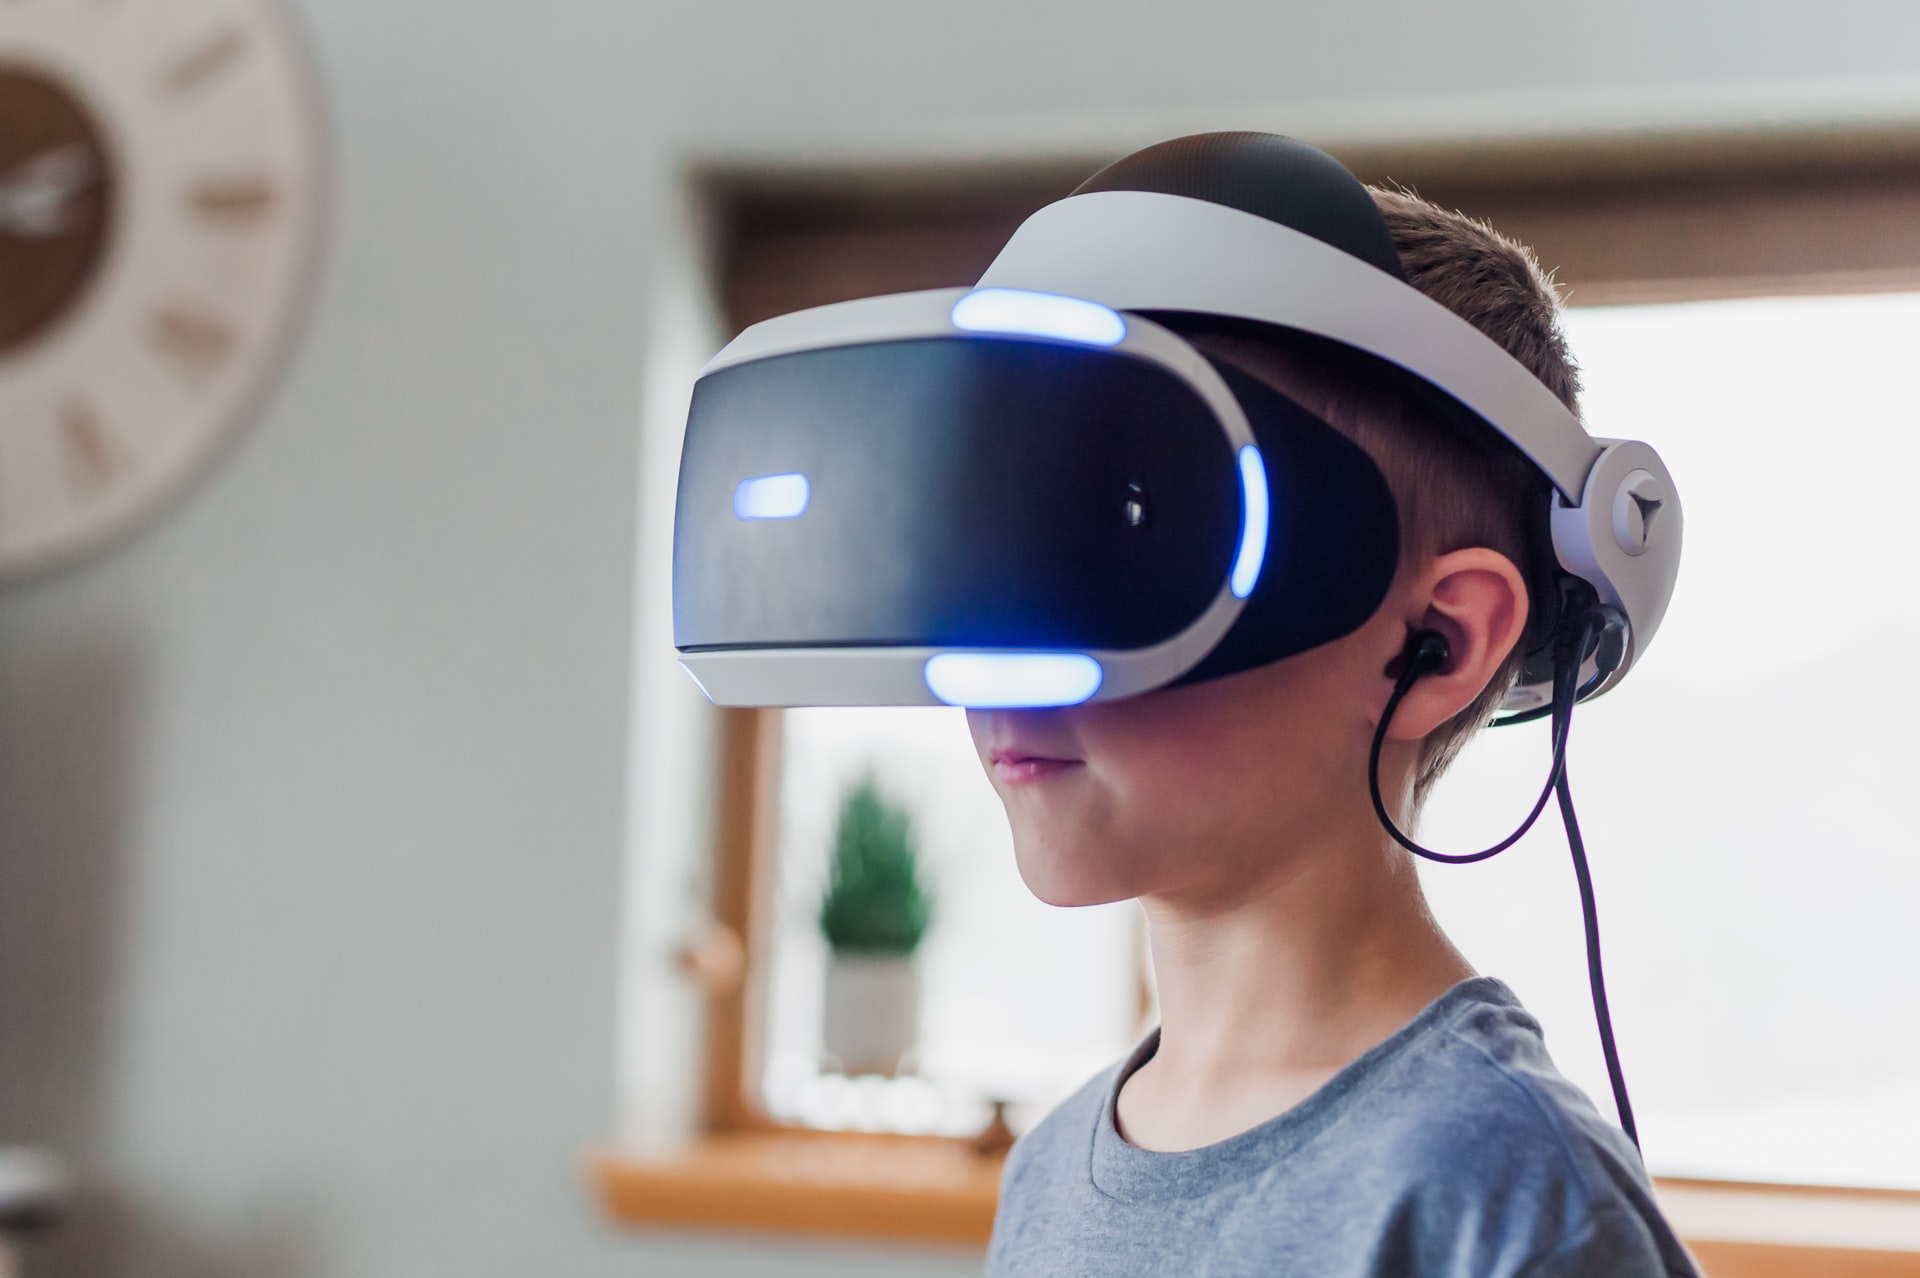 How will virtual reality change Education over the next 10 years?